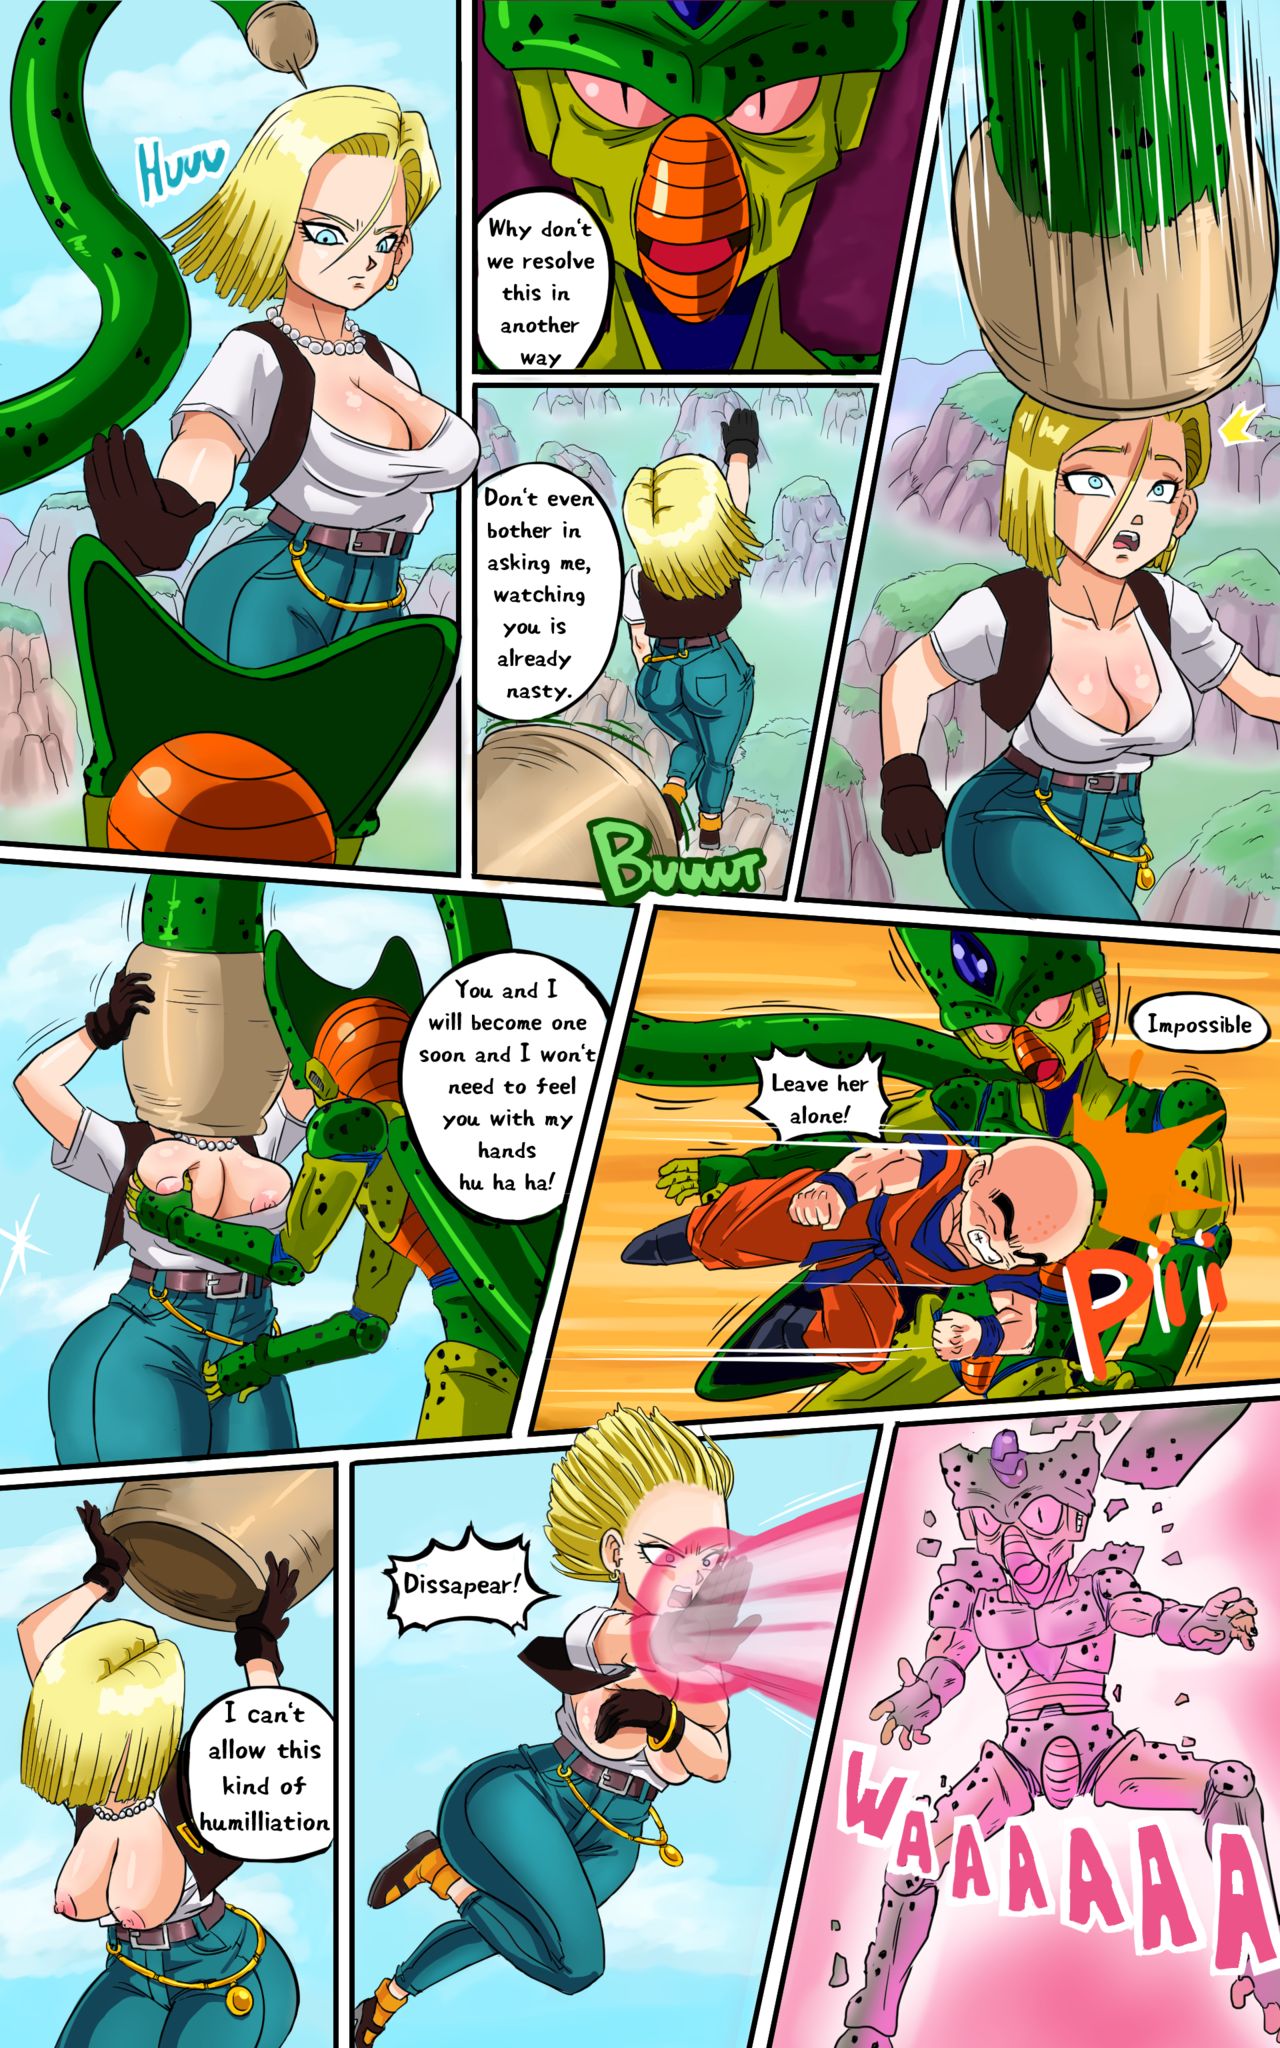 18 And Cell Hentai - Android 18 meets Krillin - Pink Pawg - KingComiX.com